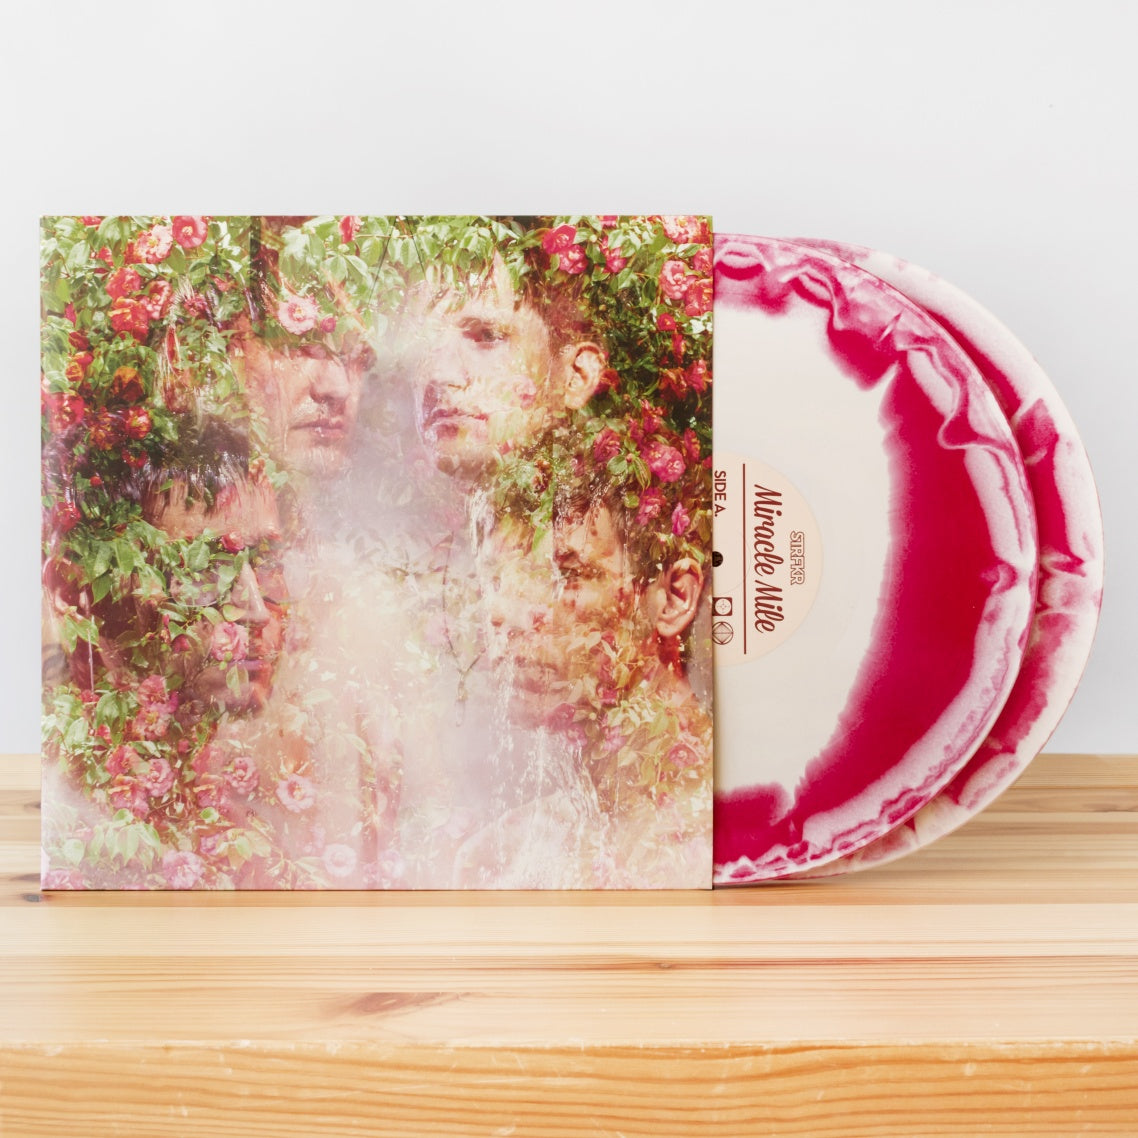 Strfkr - Miracle Mile: Limited Edition Red + Cream Mix Vinyl 2LP